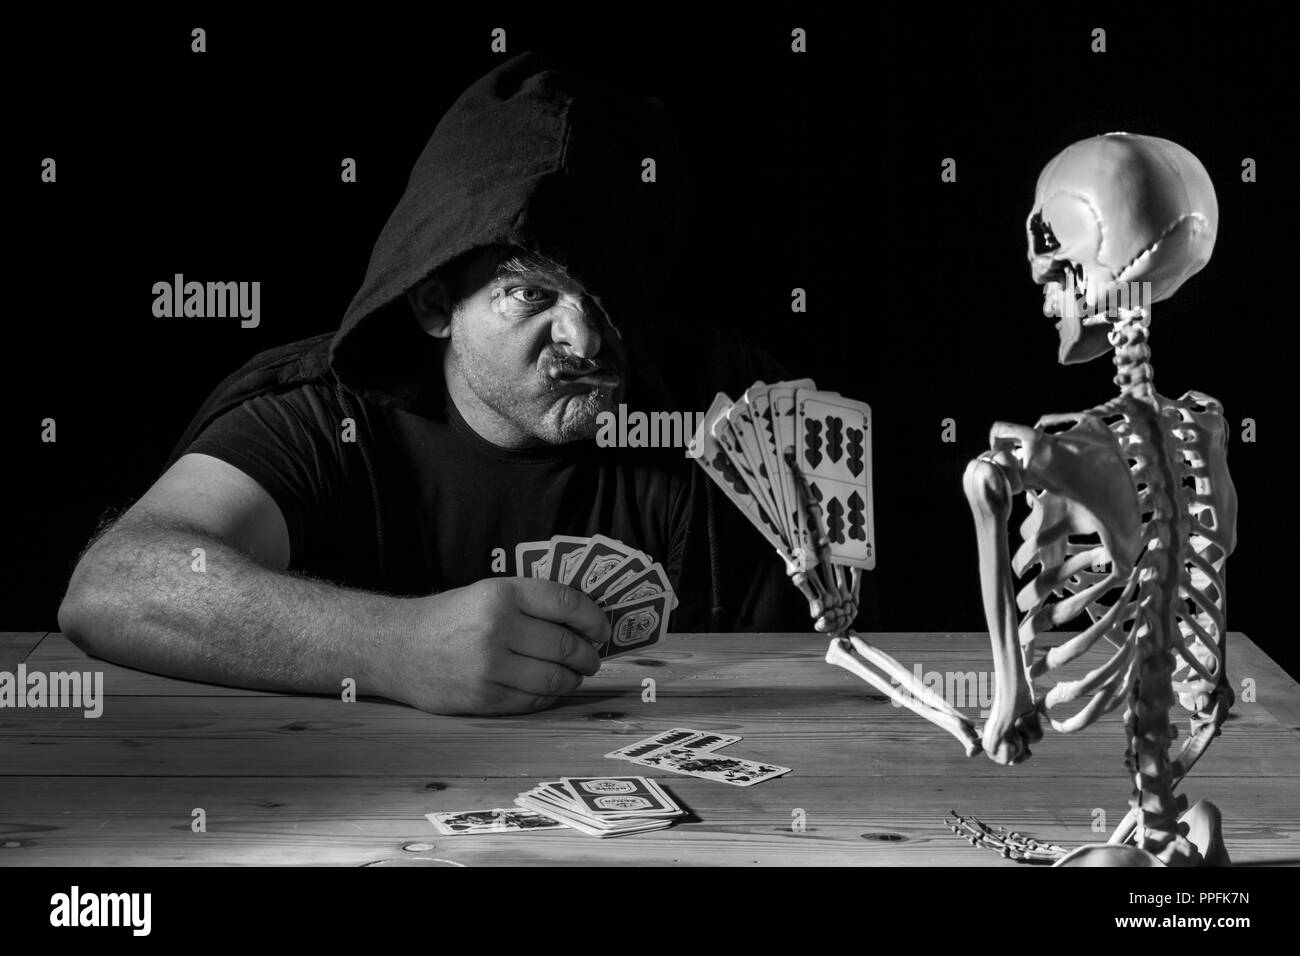 Man Plays Cards With A Skeleton His Last Game Symbol Image For Life And Death Germany Stock Photo Alamy